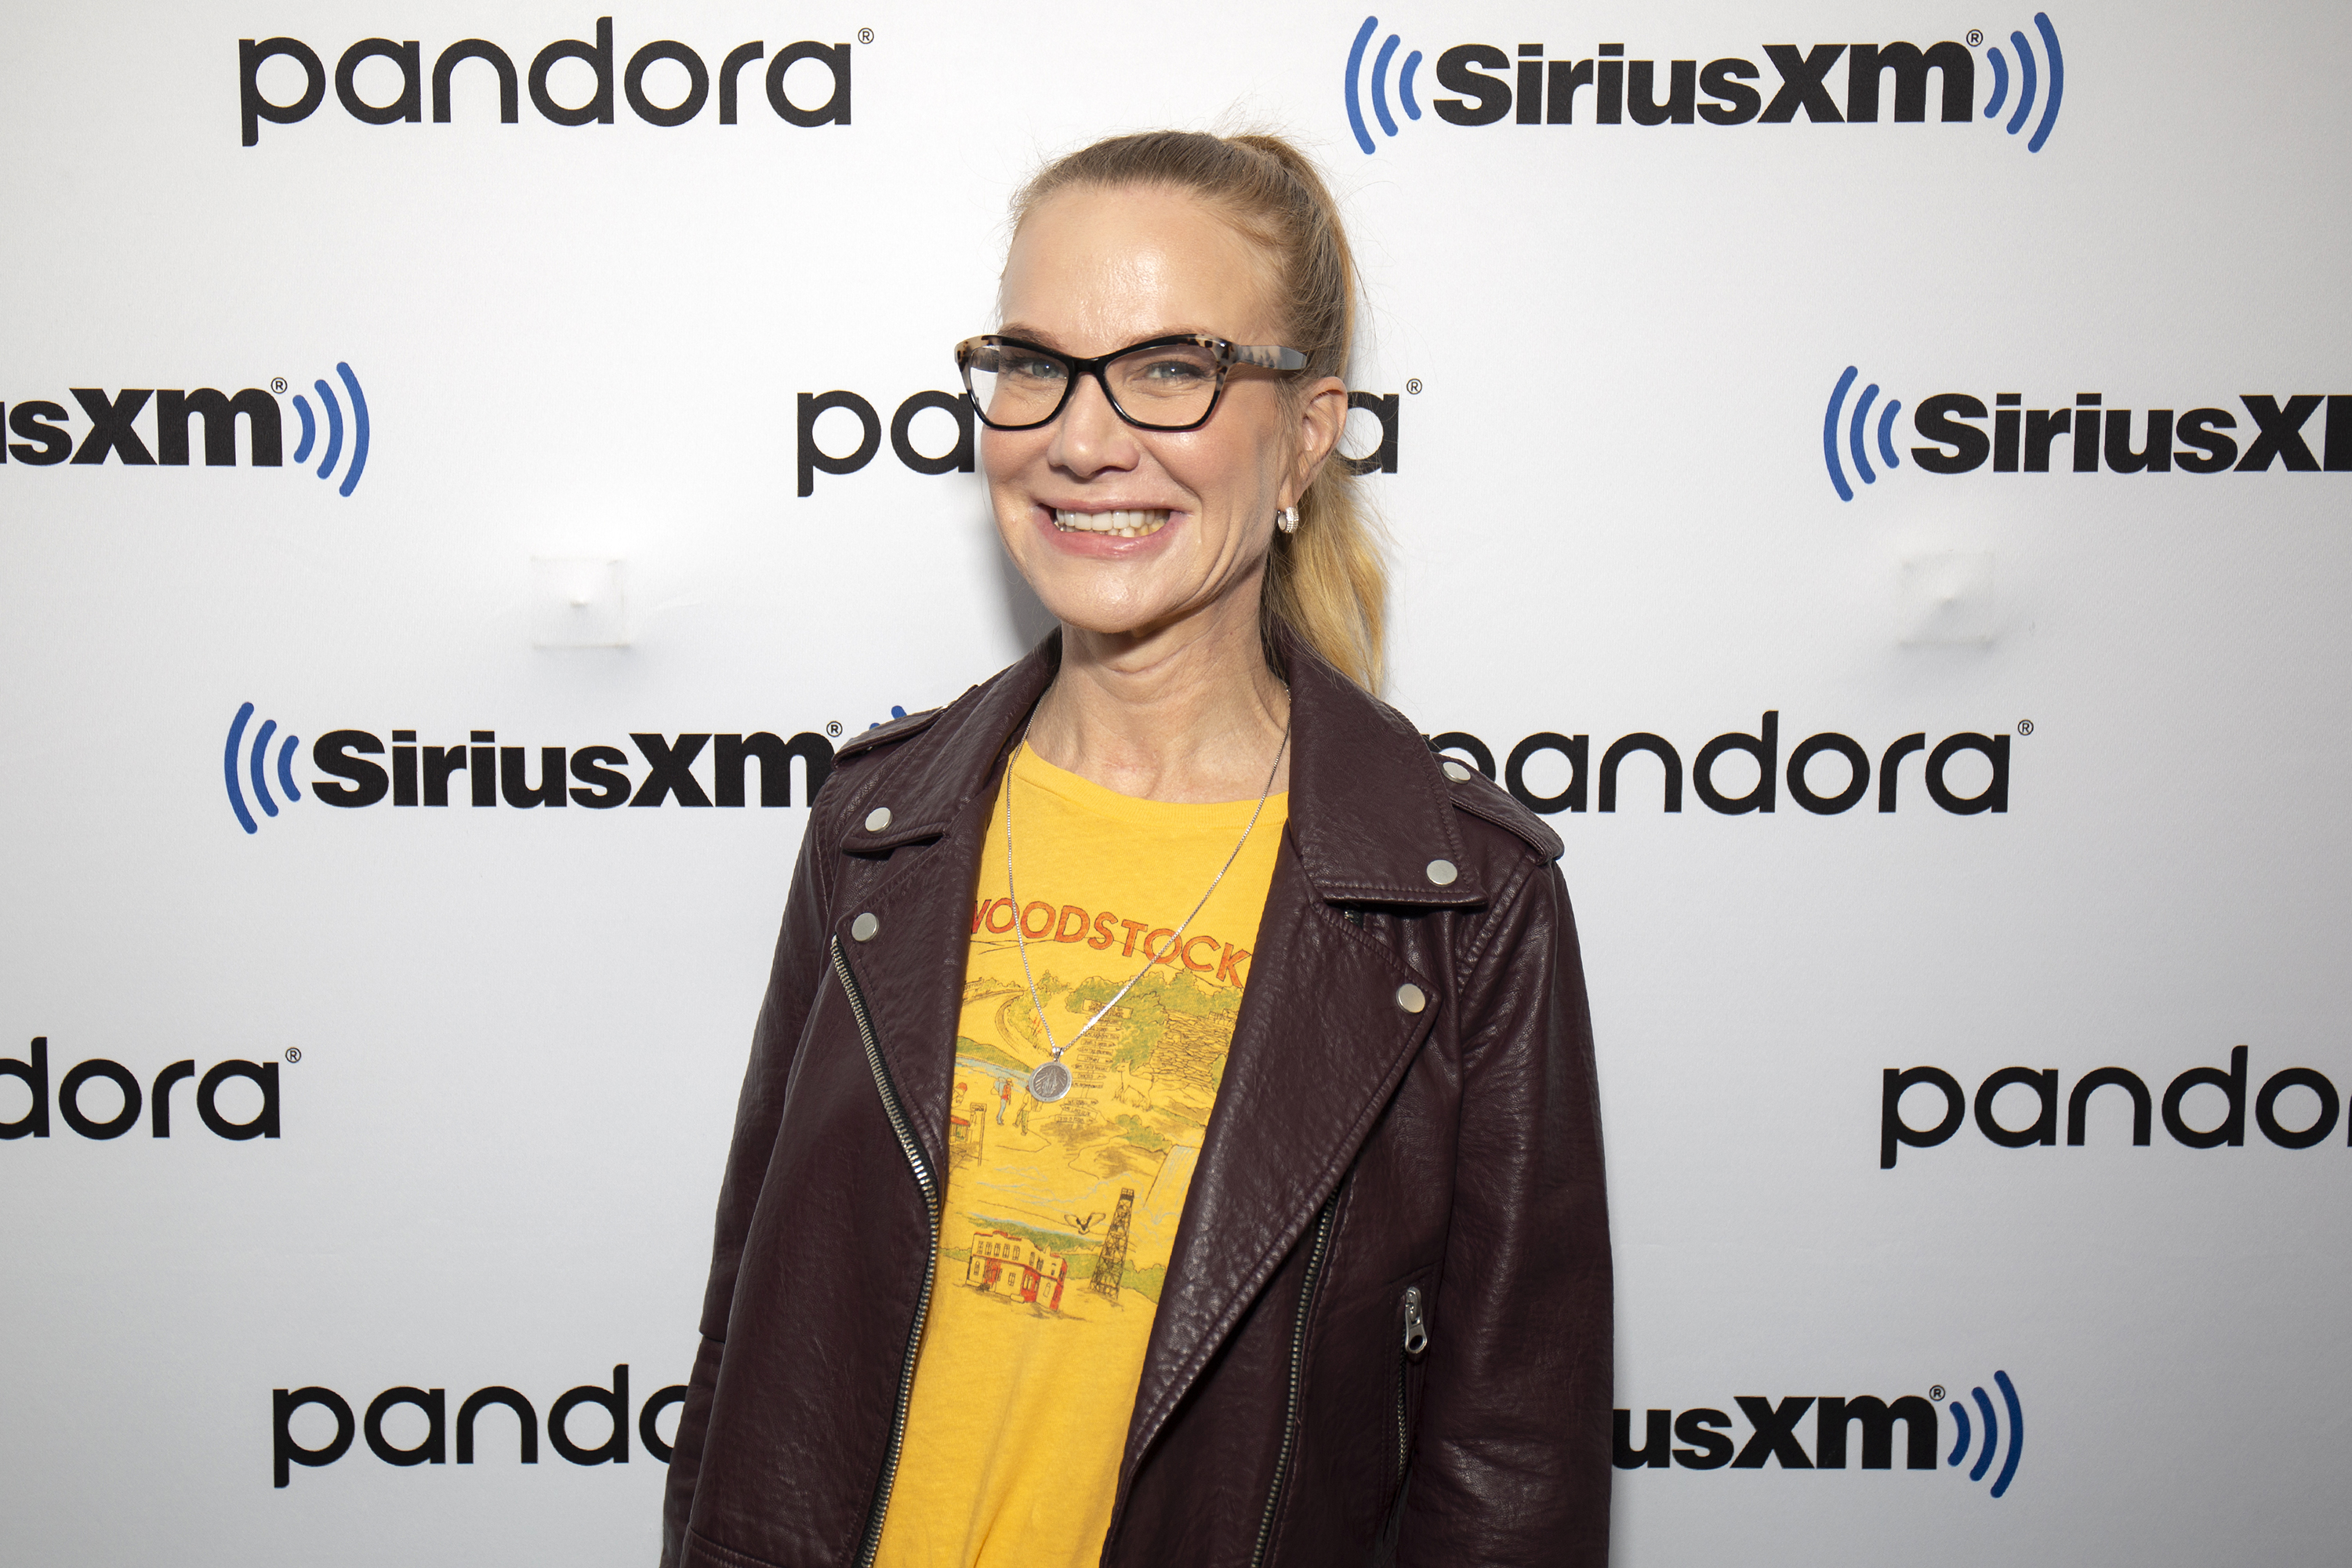 eannie Gaffigan visits SiriusXM Studios on October 3, 2019, in New York City. | Source: Getty Images